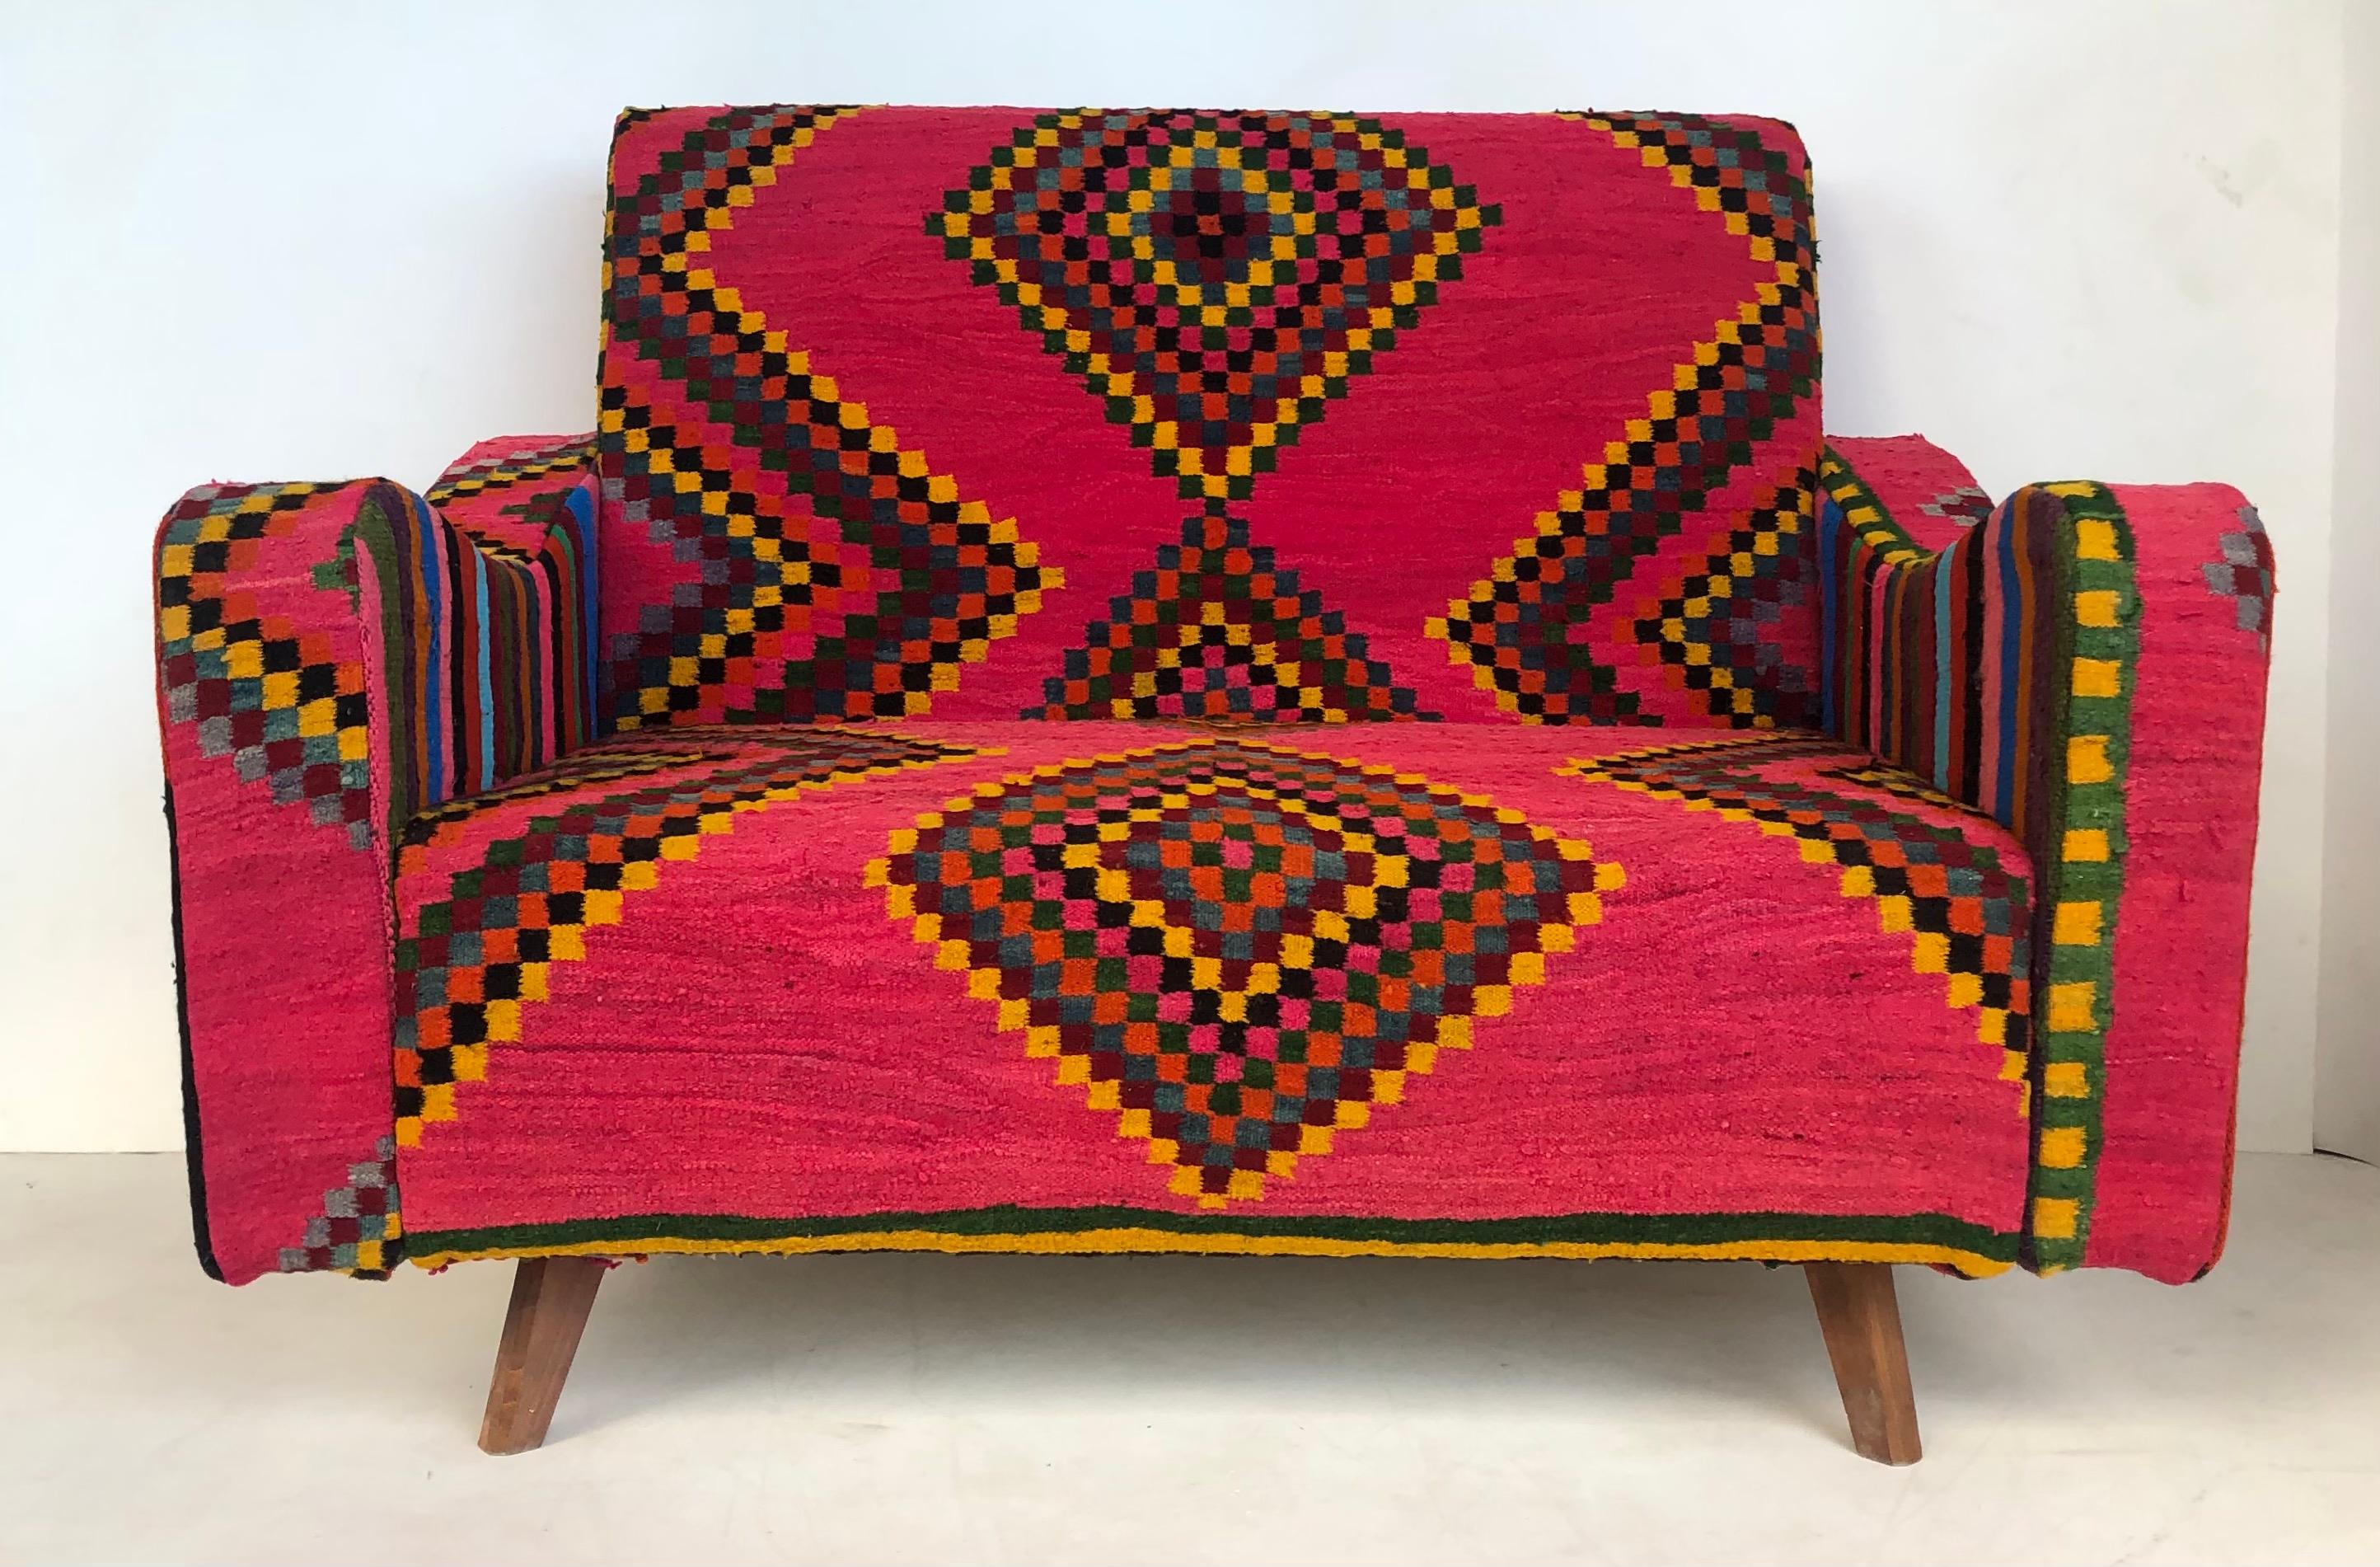 Tunisian (North Africa) woven wool textile loveseat with brightly colored fabric

Offered for sale is a Tunisian (North African) woven wool textile upholstered loveseat with angular, tapering conical legs. This brightly colored sofa is being